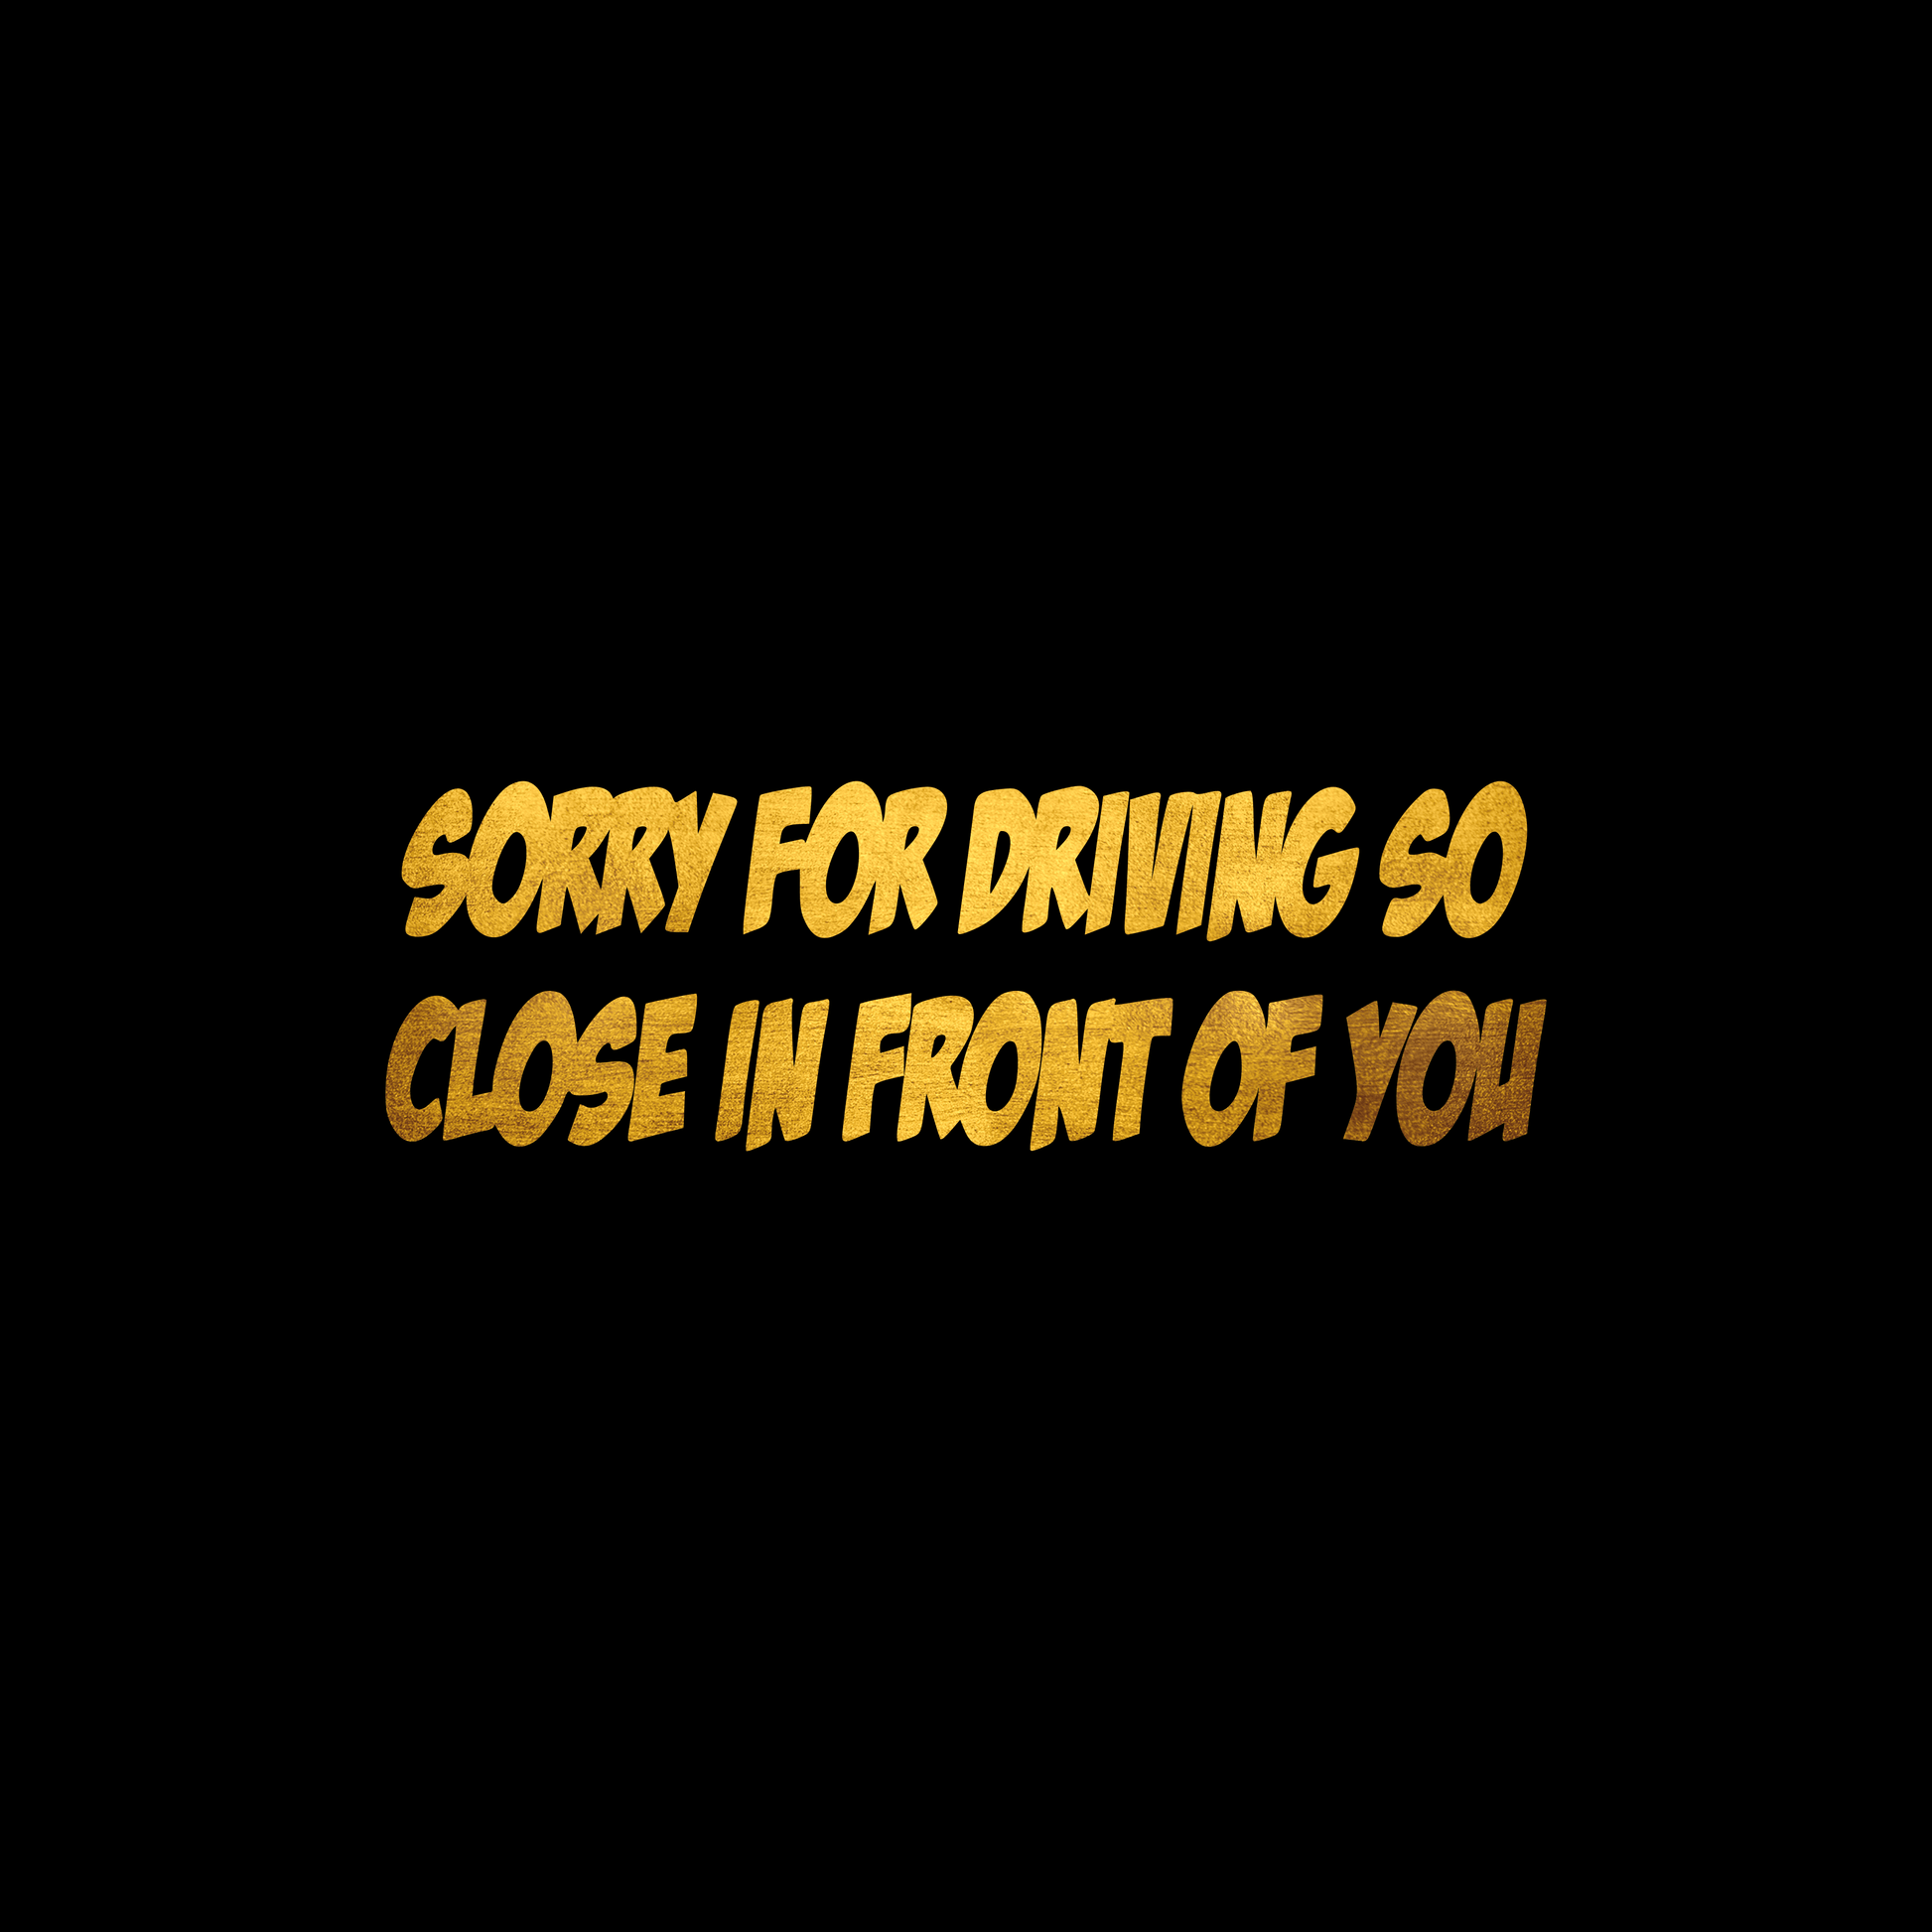 Sorry for driving so close in front of you sticker decal